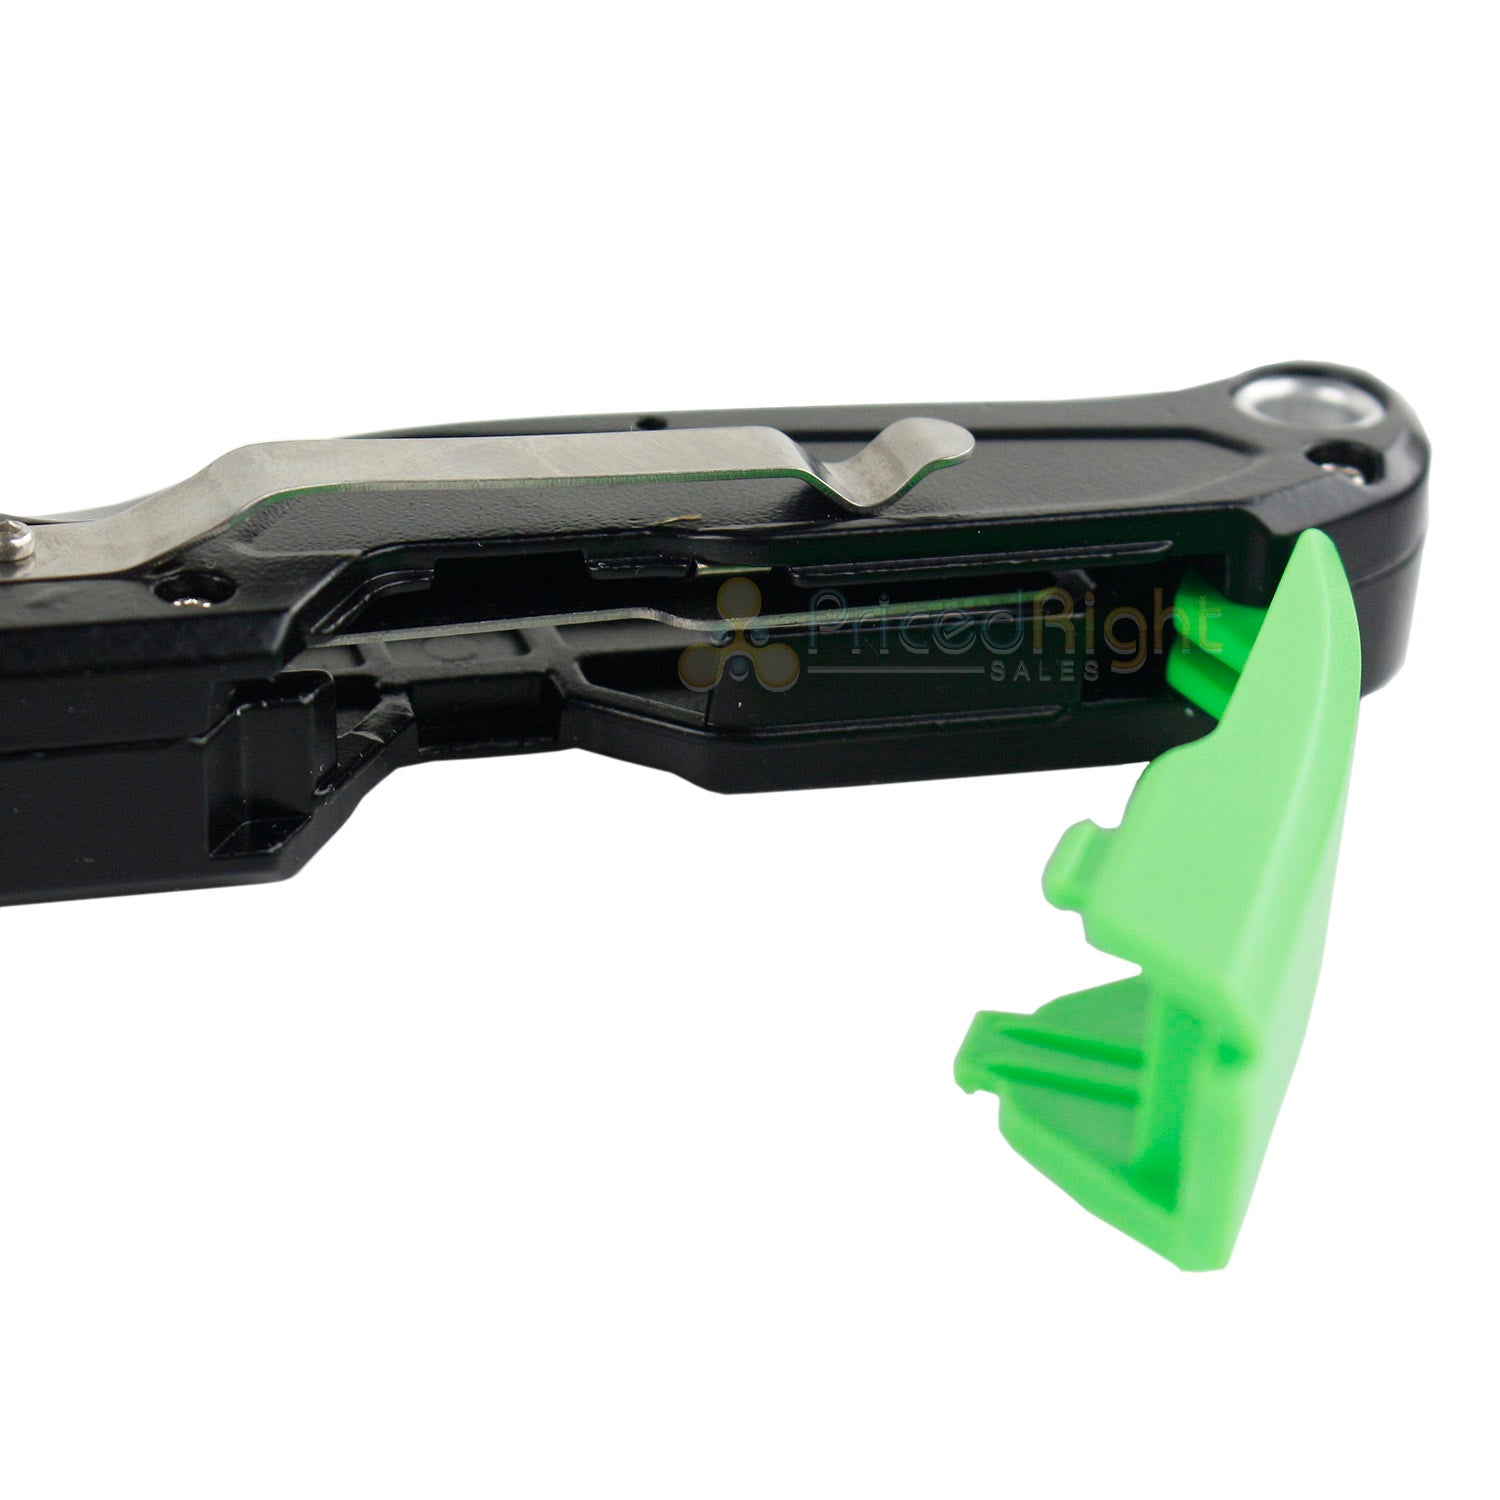 Quick Release Folding Retractable Utility Knife With Extra Razor Blade Storage